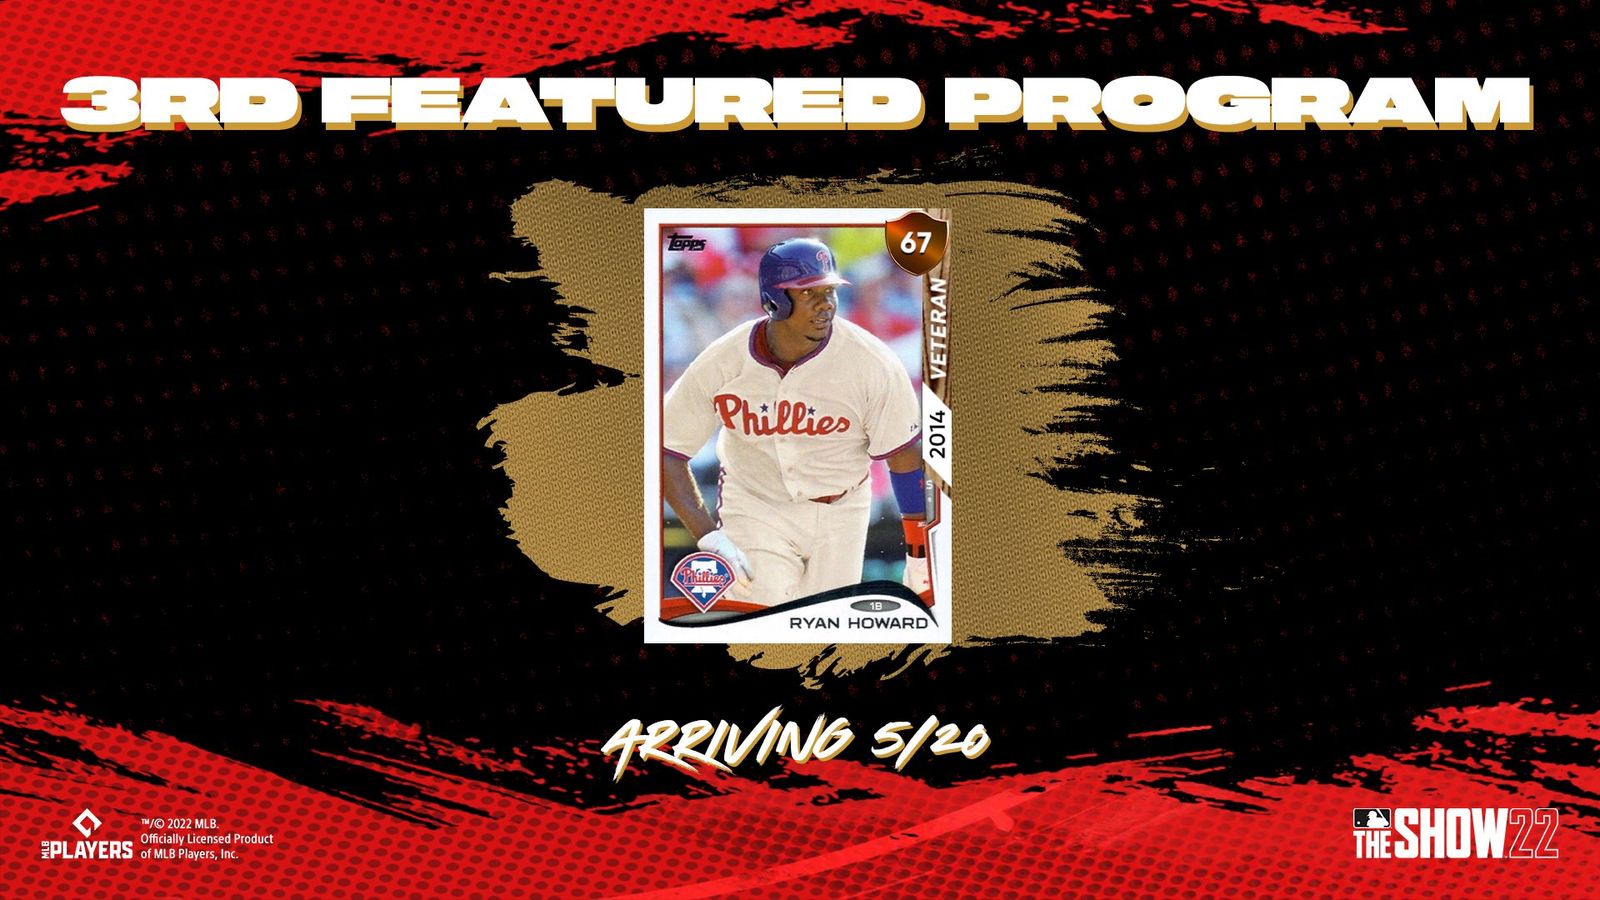 MLB THe Show 22 Roy Halladay featured program